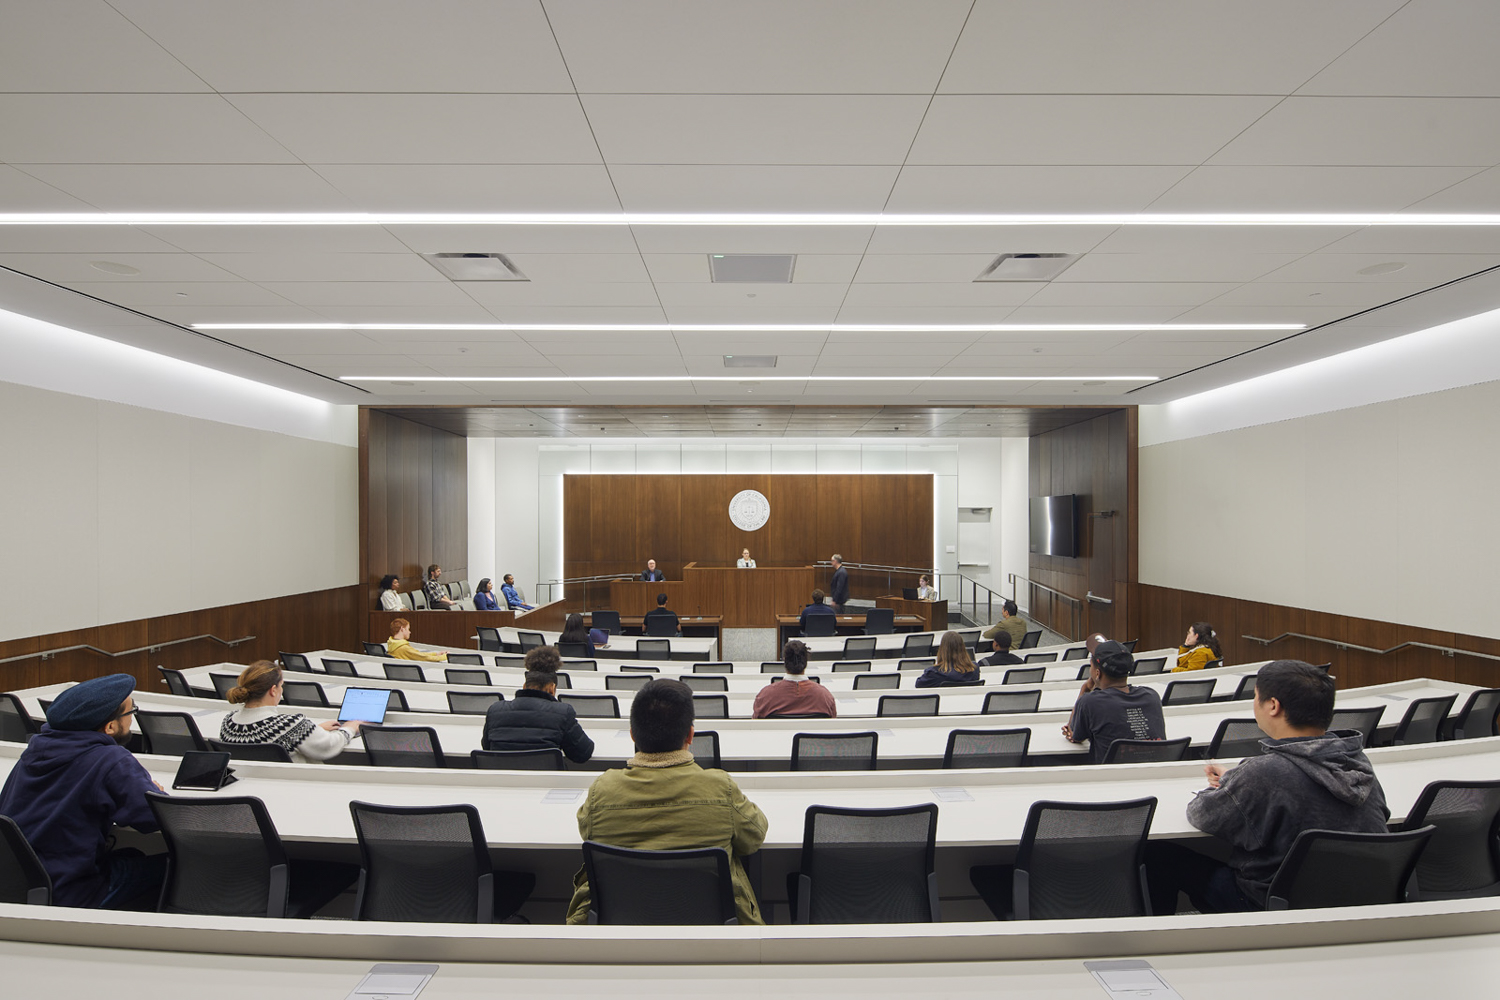 The Academe at 198 mock-courtroom classroom, image by Bruce Damonte